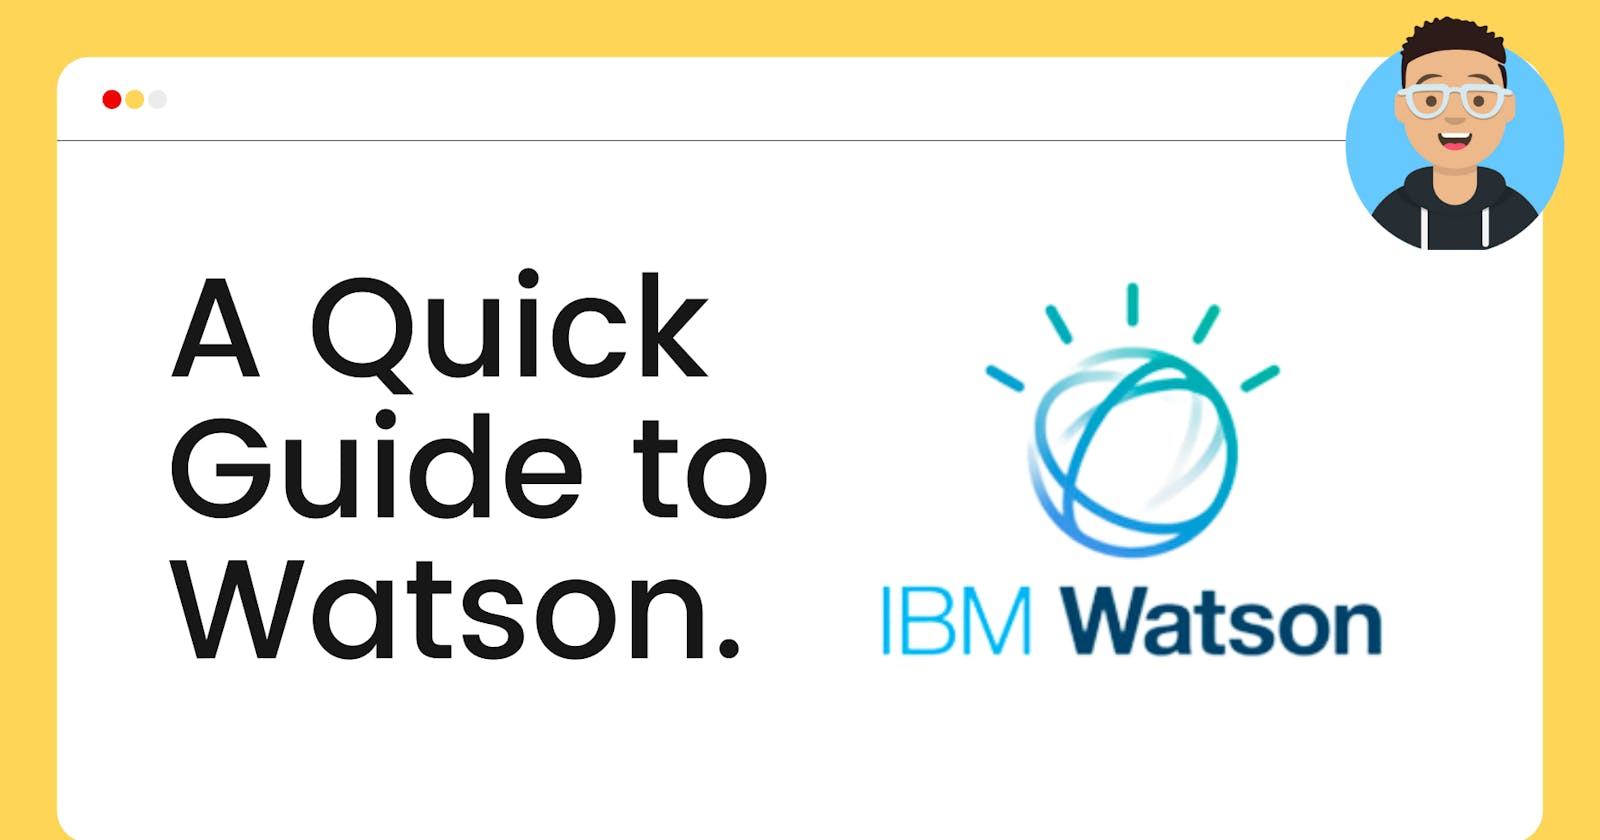 A Quick Guide to IBM Watson.